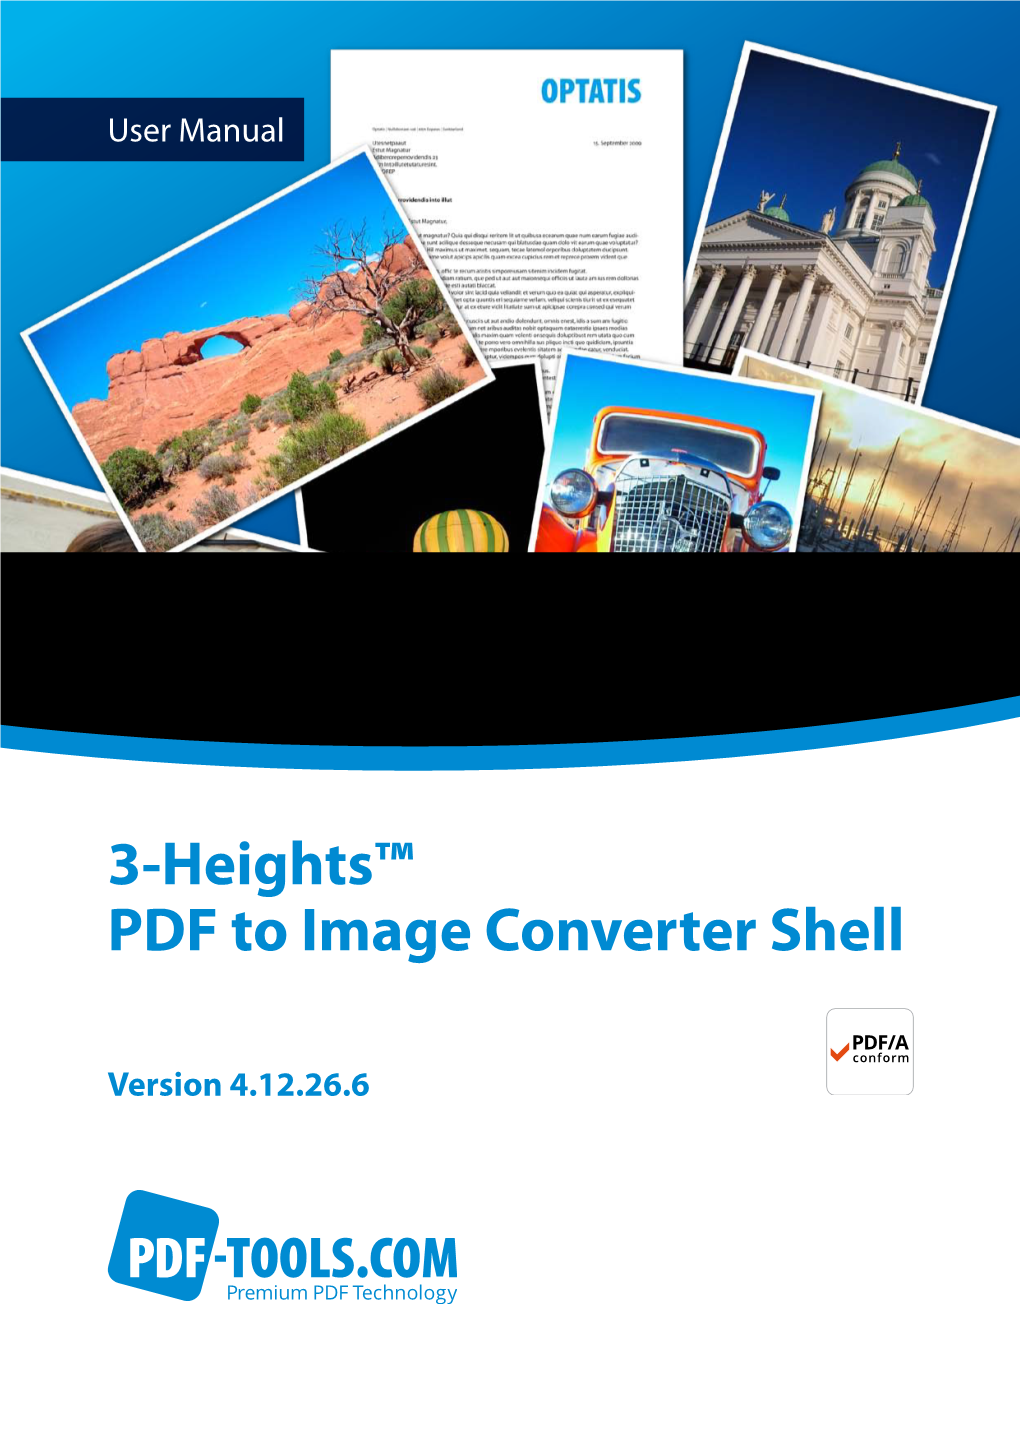 3-Heights™ PDF to Image Converter Shell